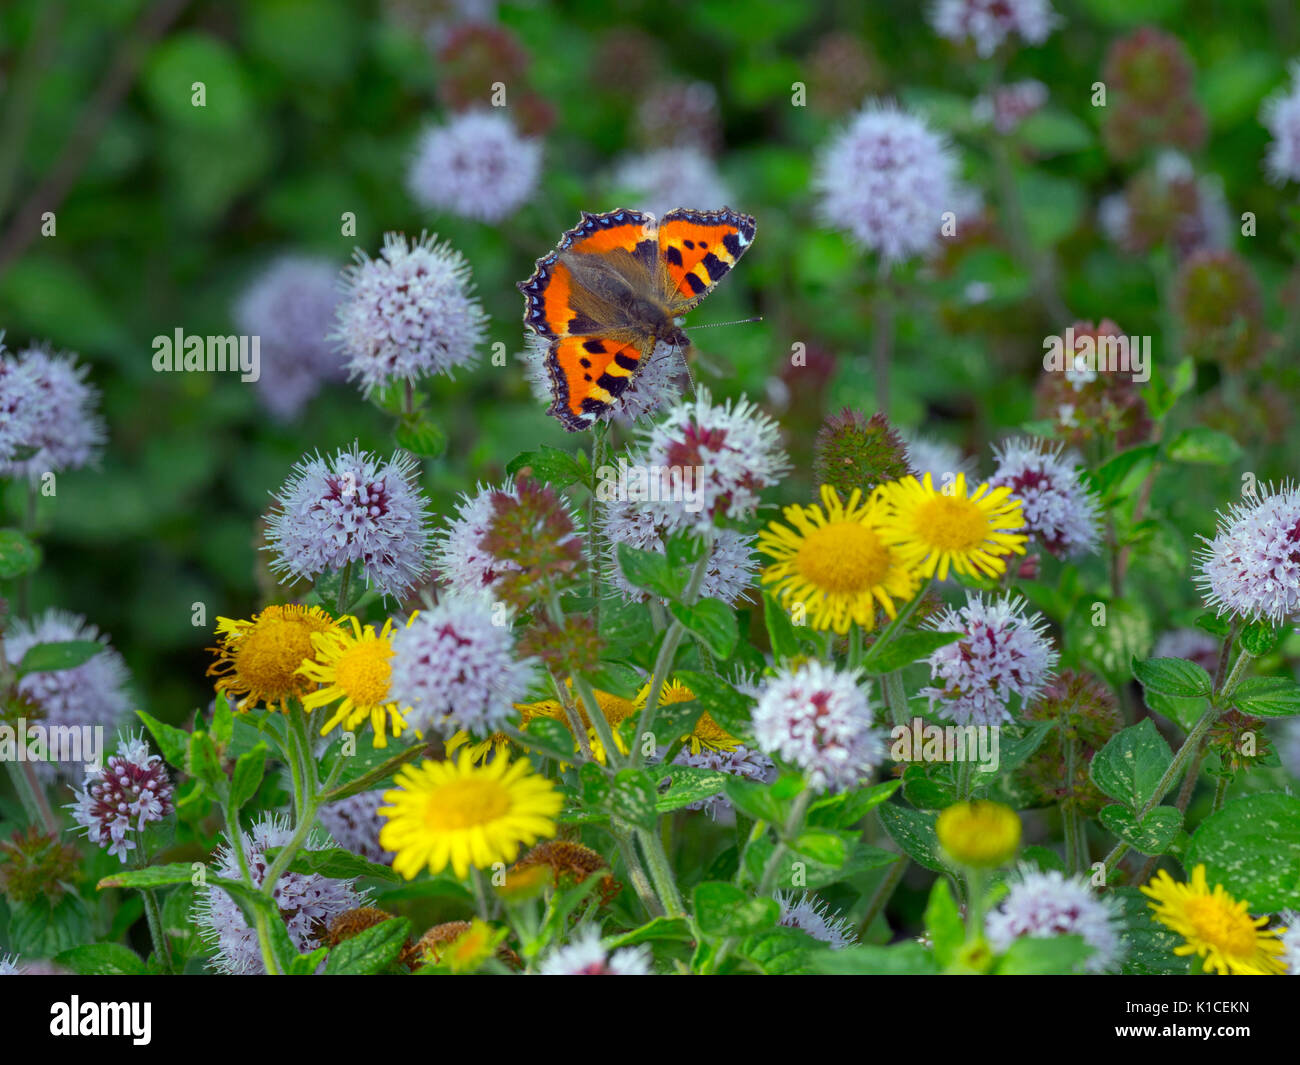 Small Tortoiseshell Butterfly Aglais urticae feeding on wild water mint and Fleabane flowers August Stock Photo